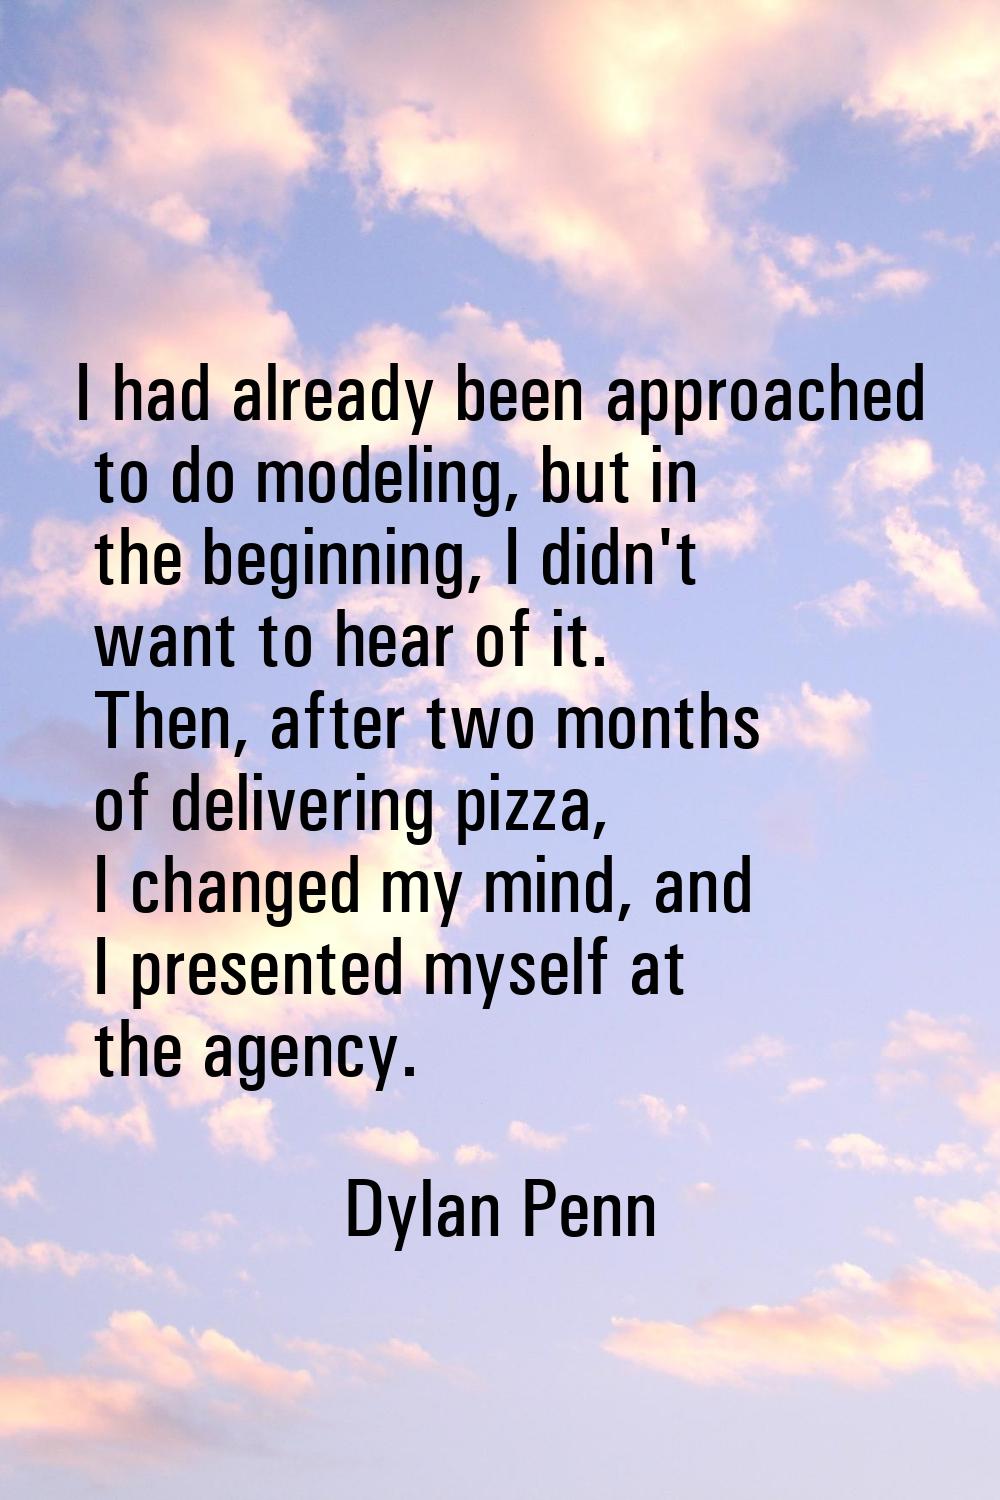 I had already been approached to do modeling, but in the beginning, I didn't want to hear of it. Th